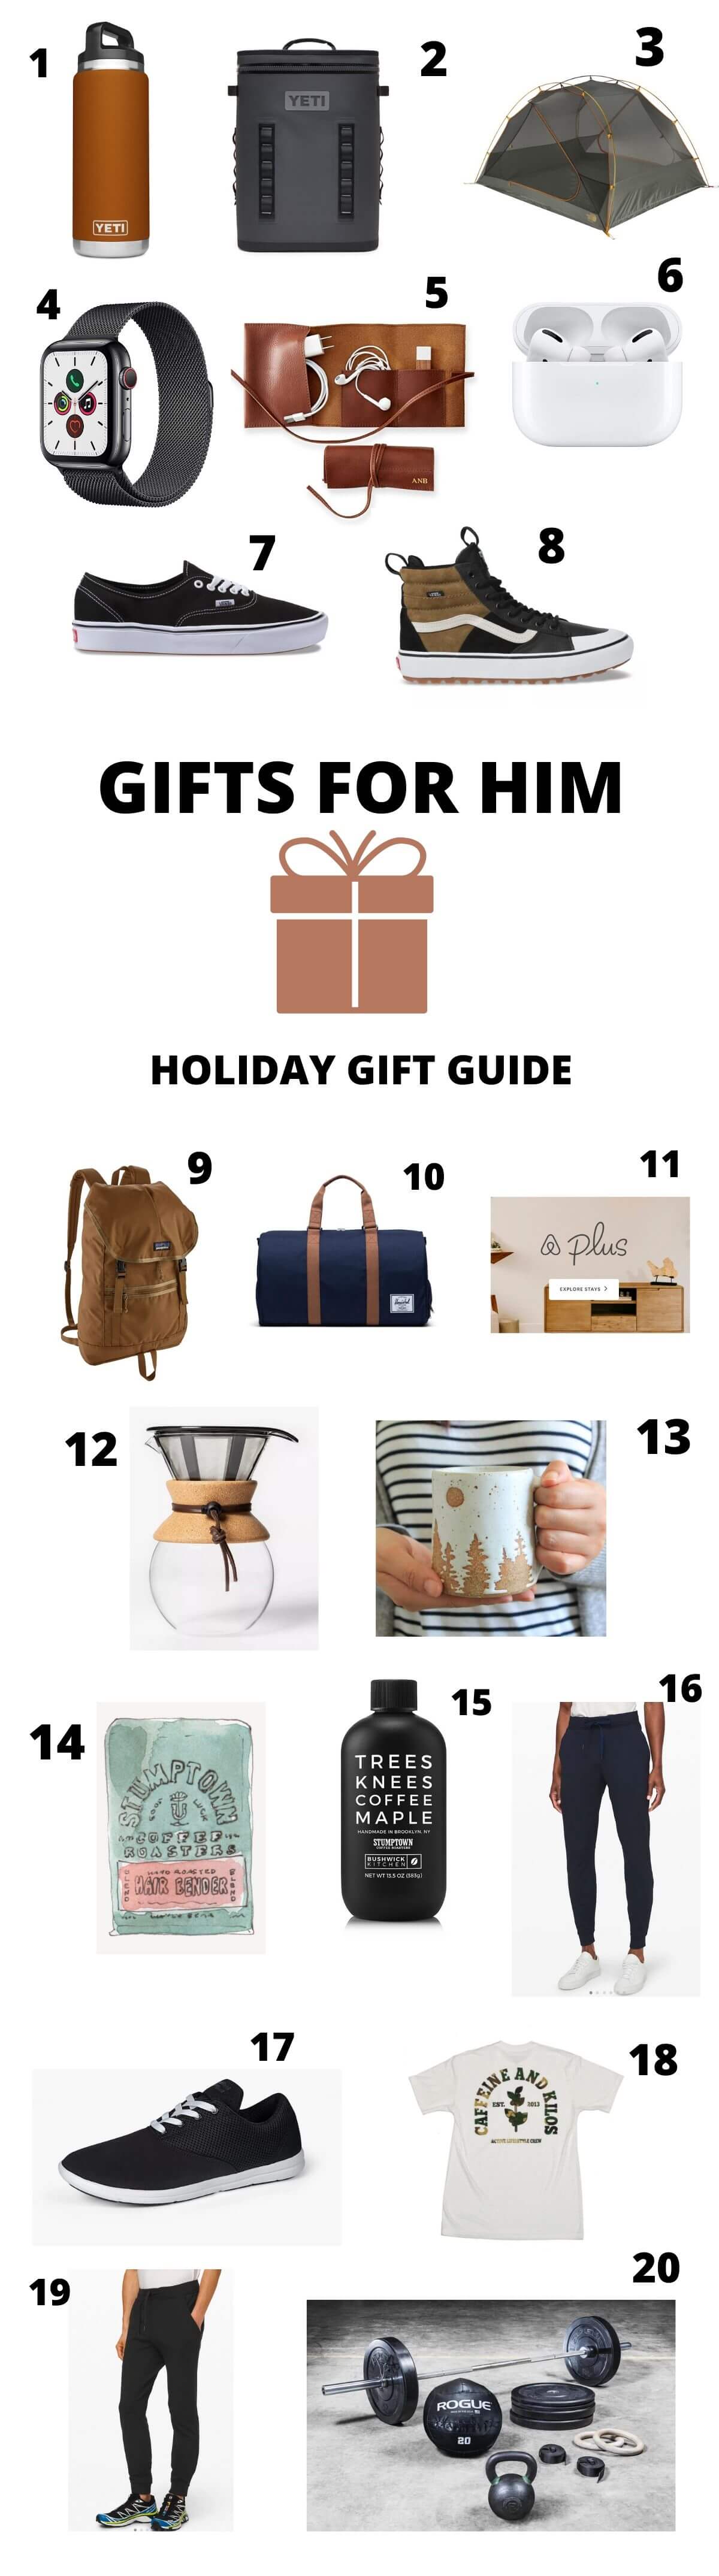 holiday gift guide for him 2019